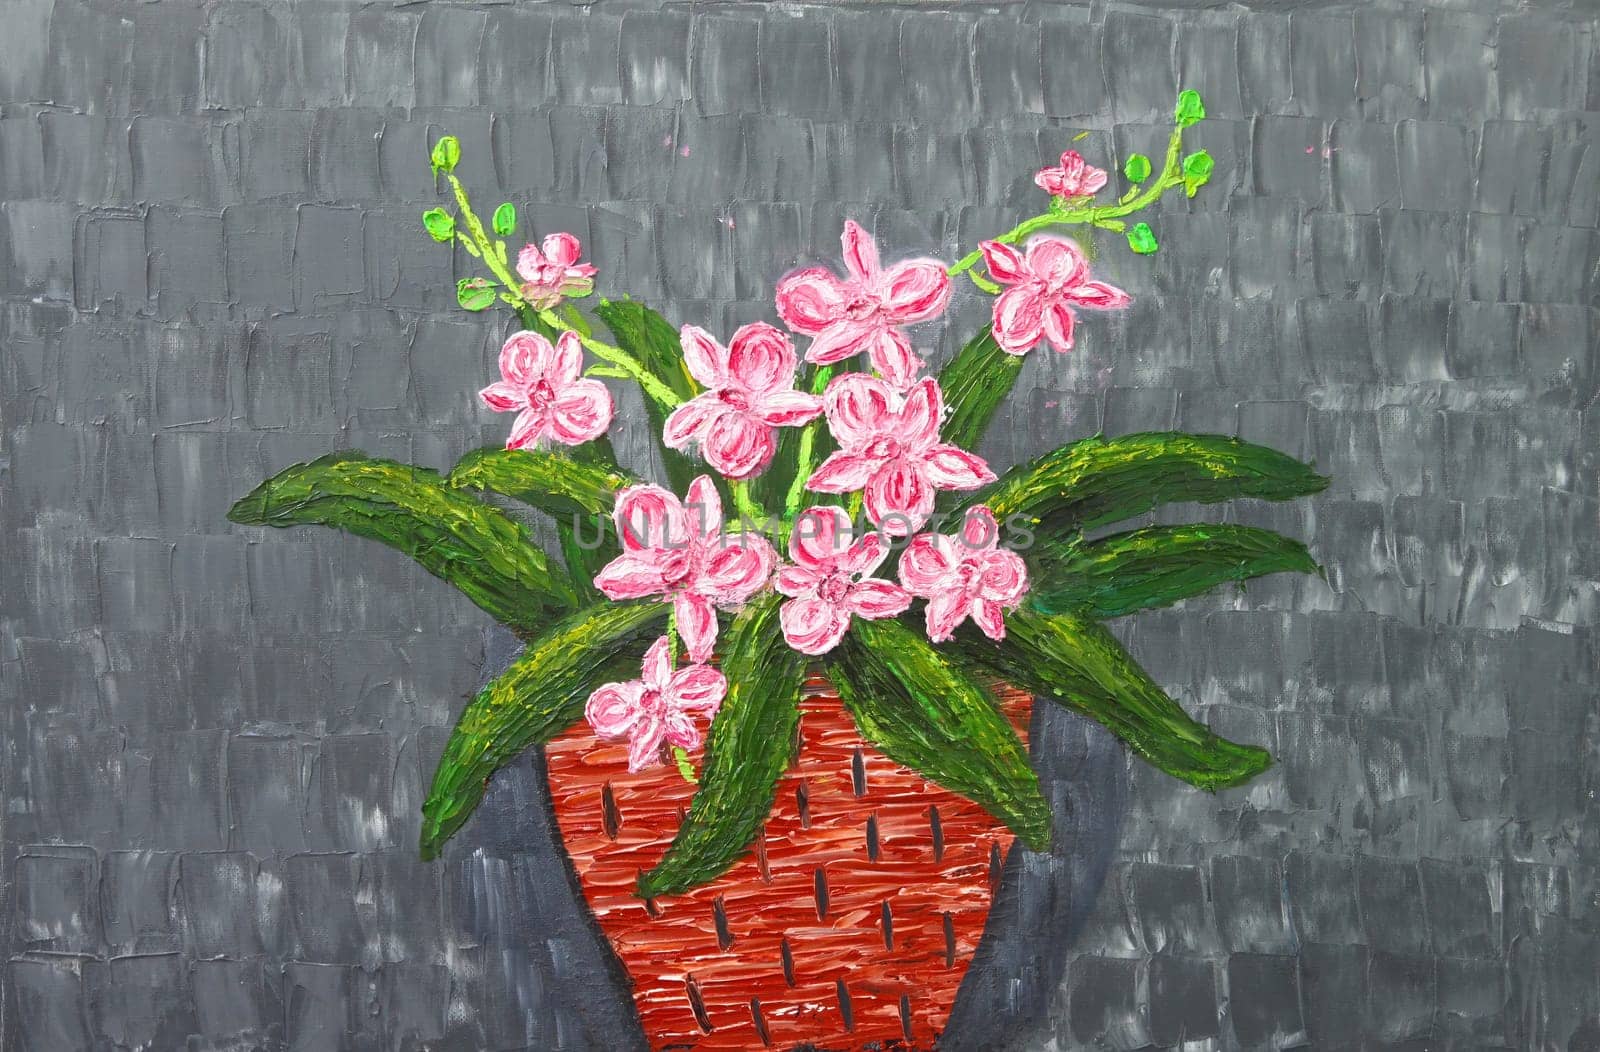 Red and white orchids growing in red clay pot by jarenwicklund